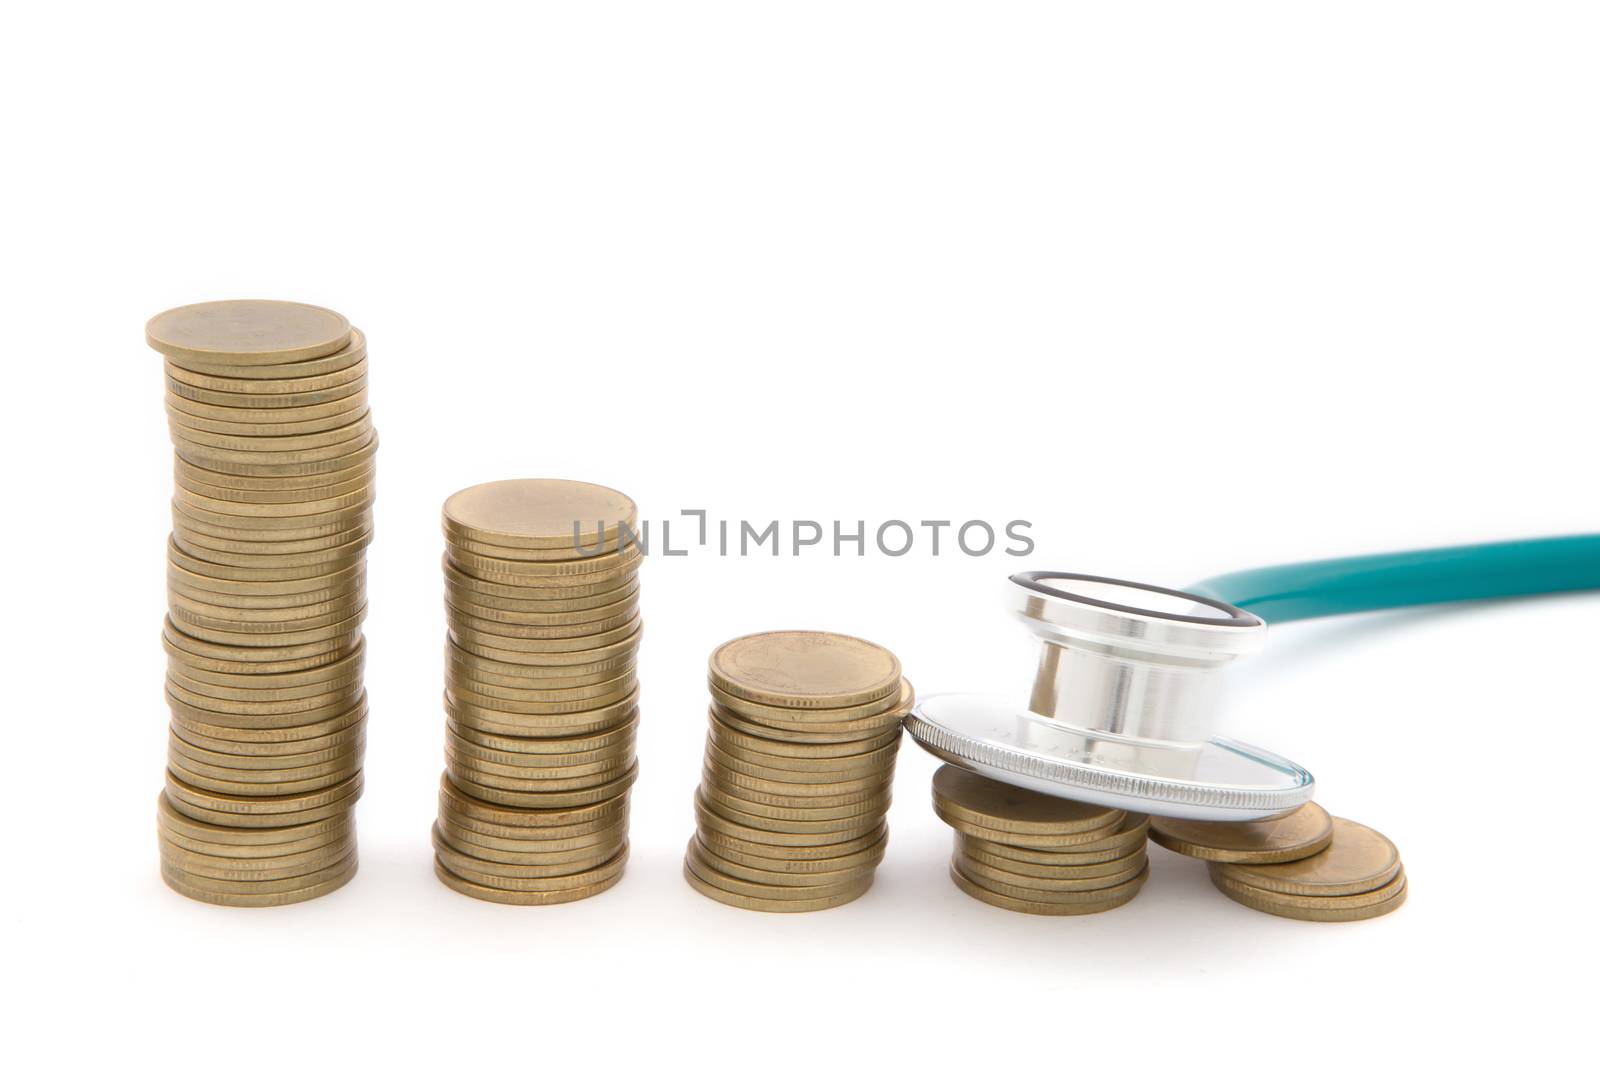 Stethoscope over  coins. Concept of saving bad economy by rufous